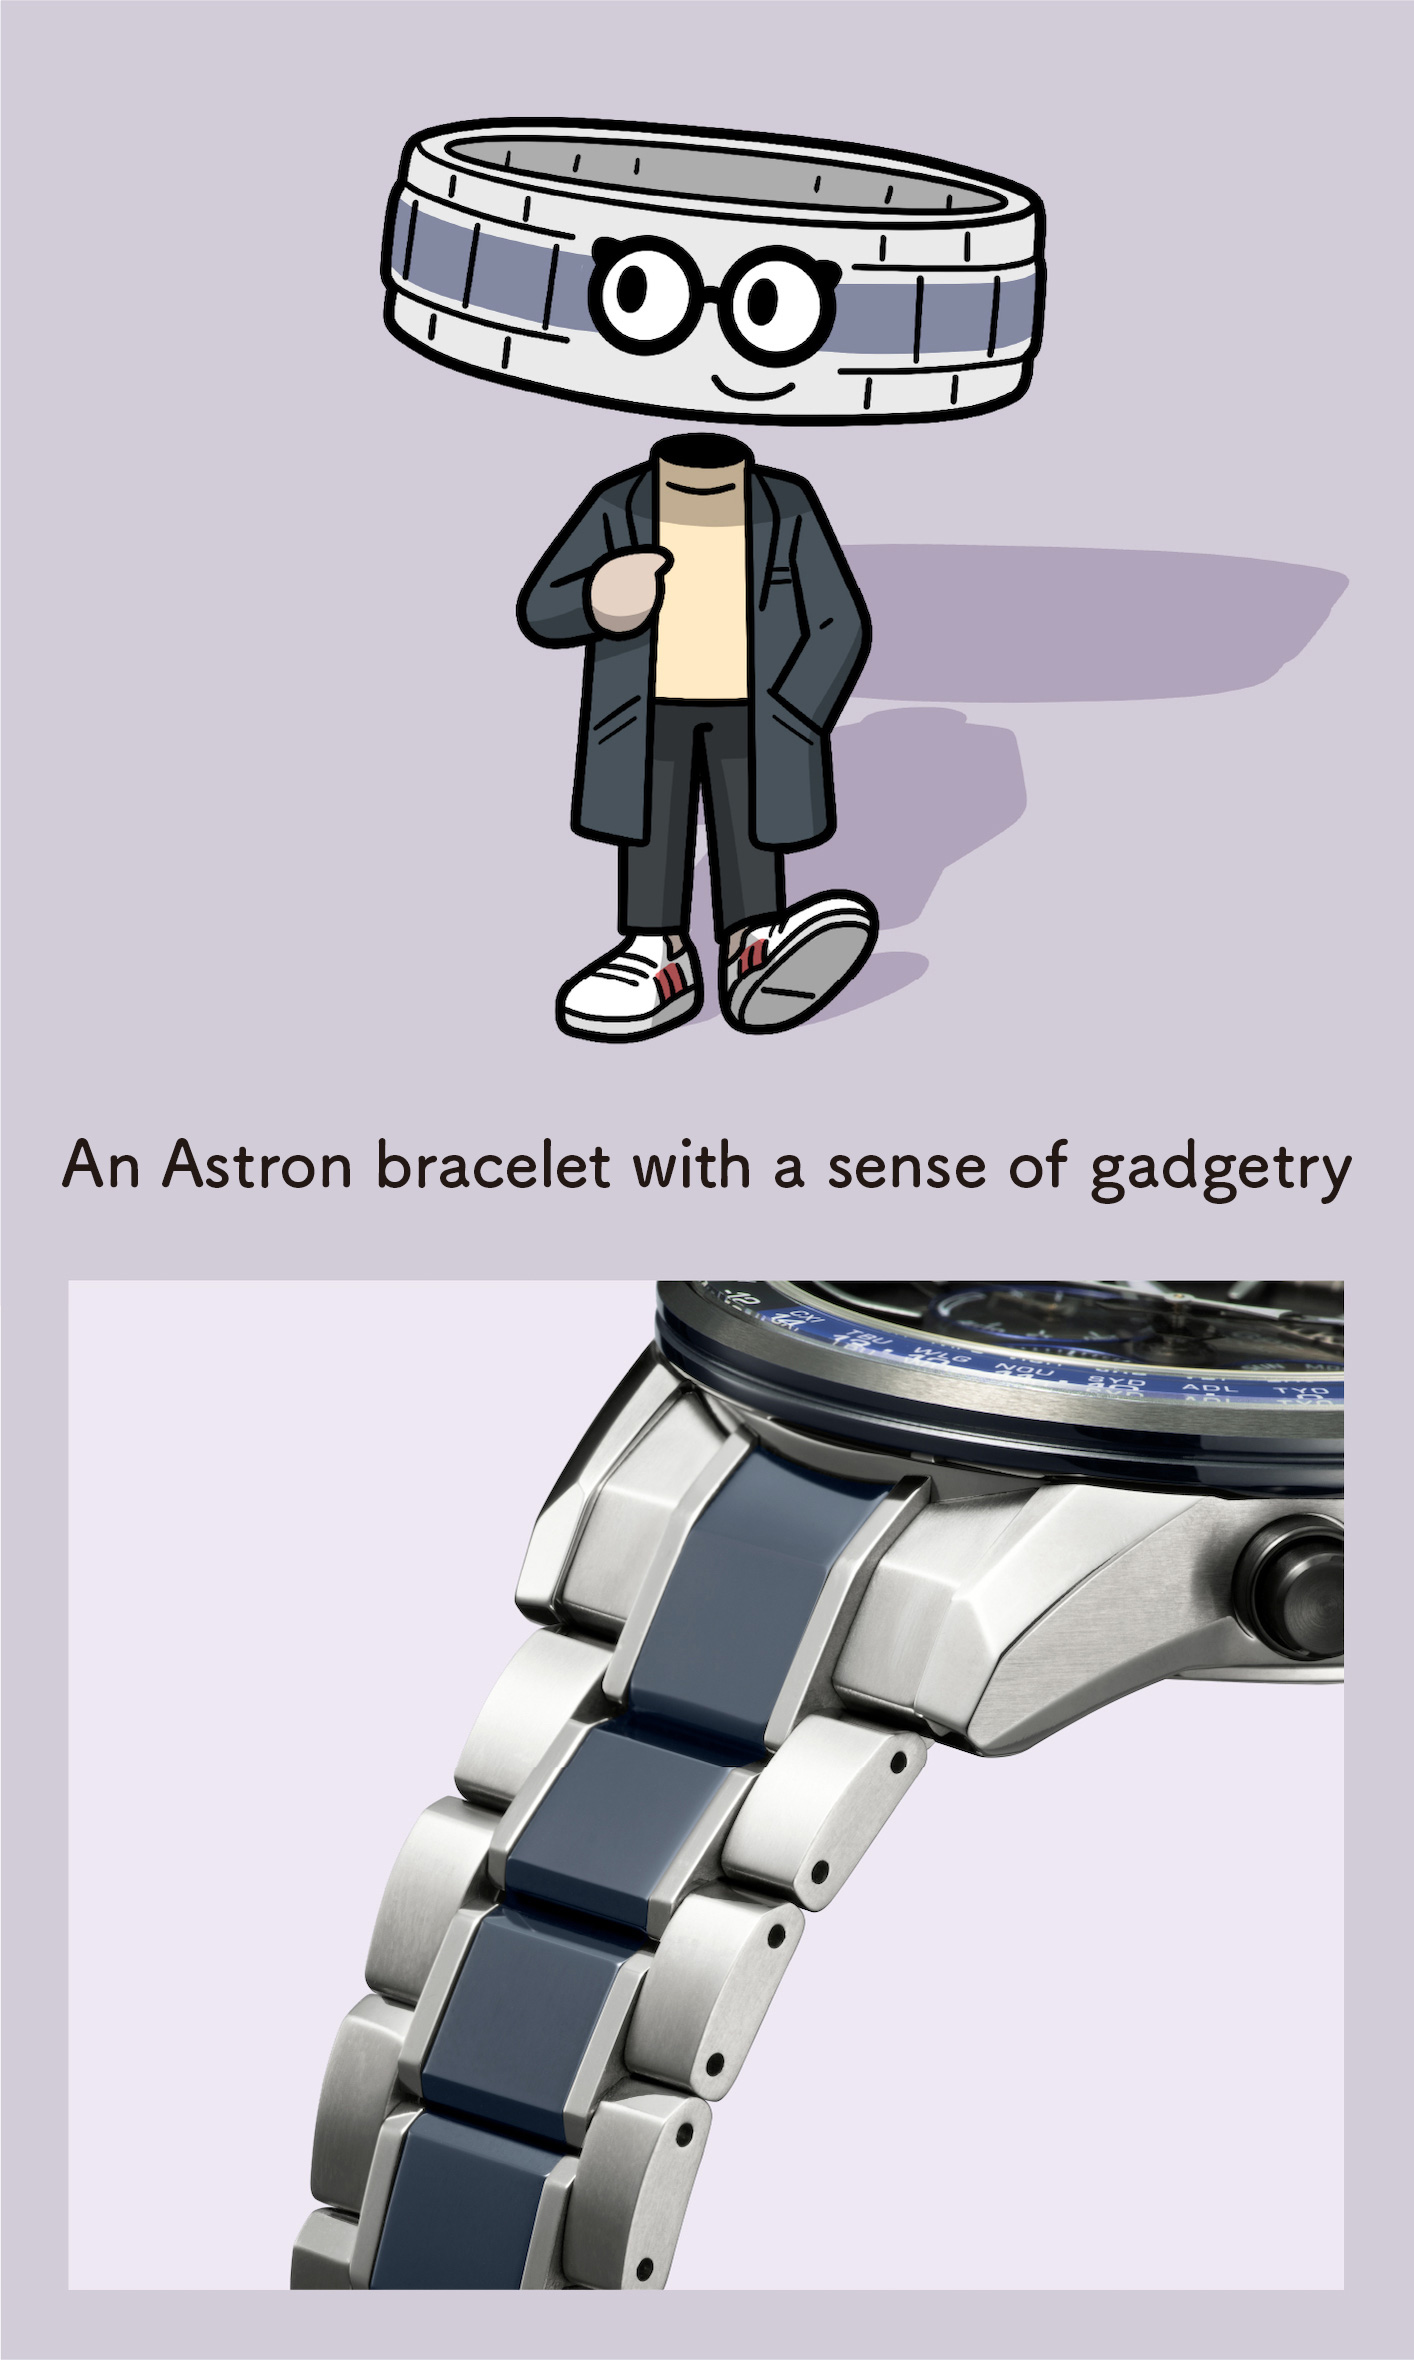 An Astron bracelet with a sense of gadgetry (Enlarged photo of the bracelet)